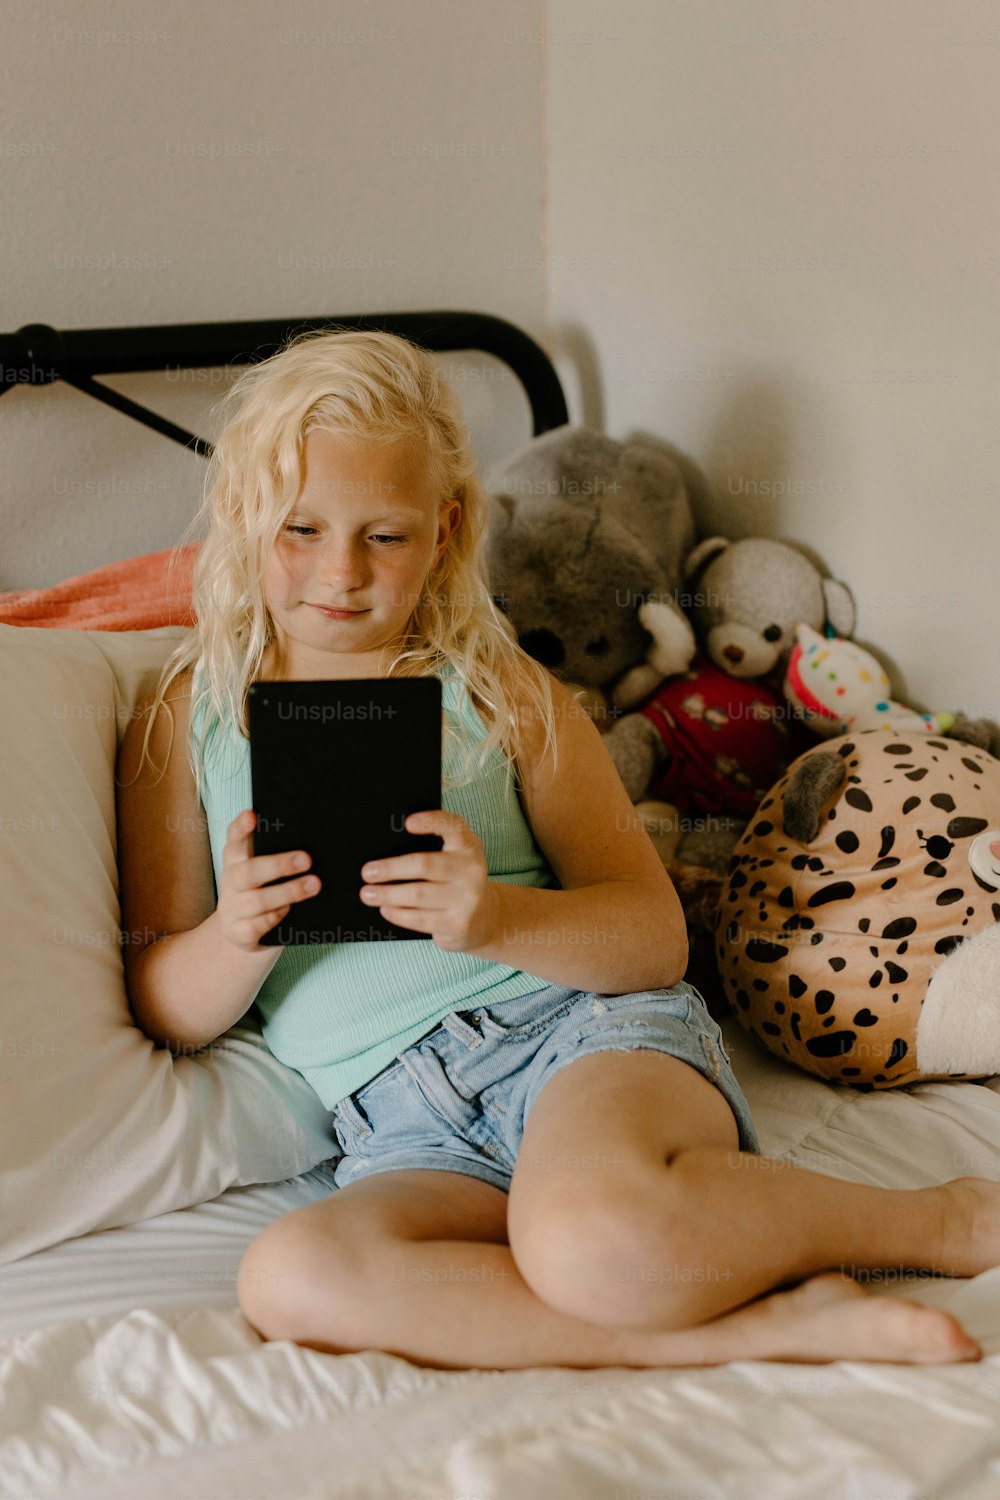 a little girl sitting on a bed holding a tablet